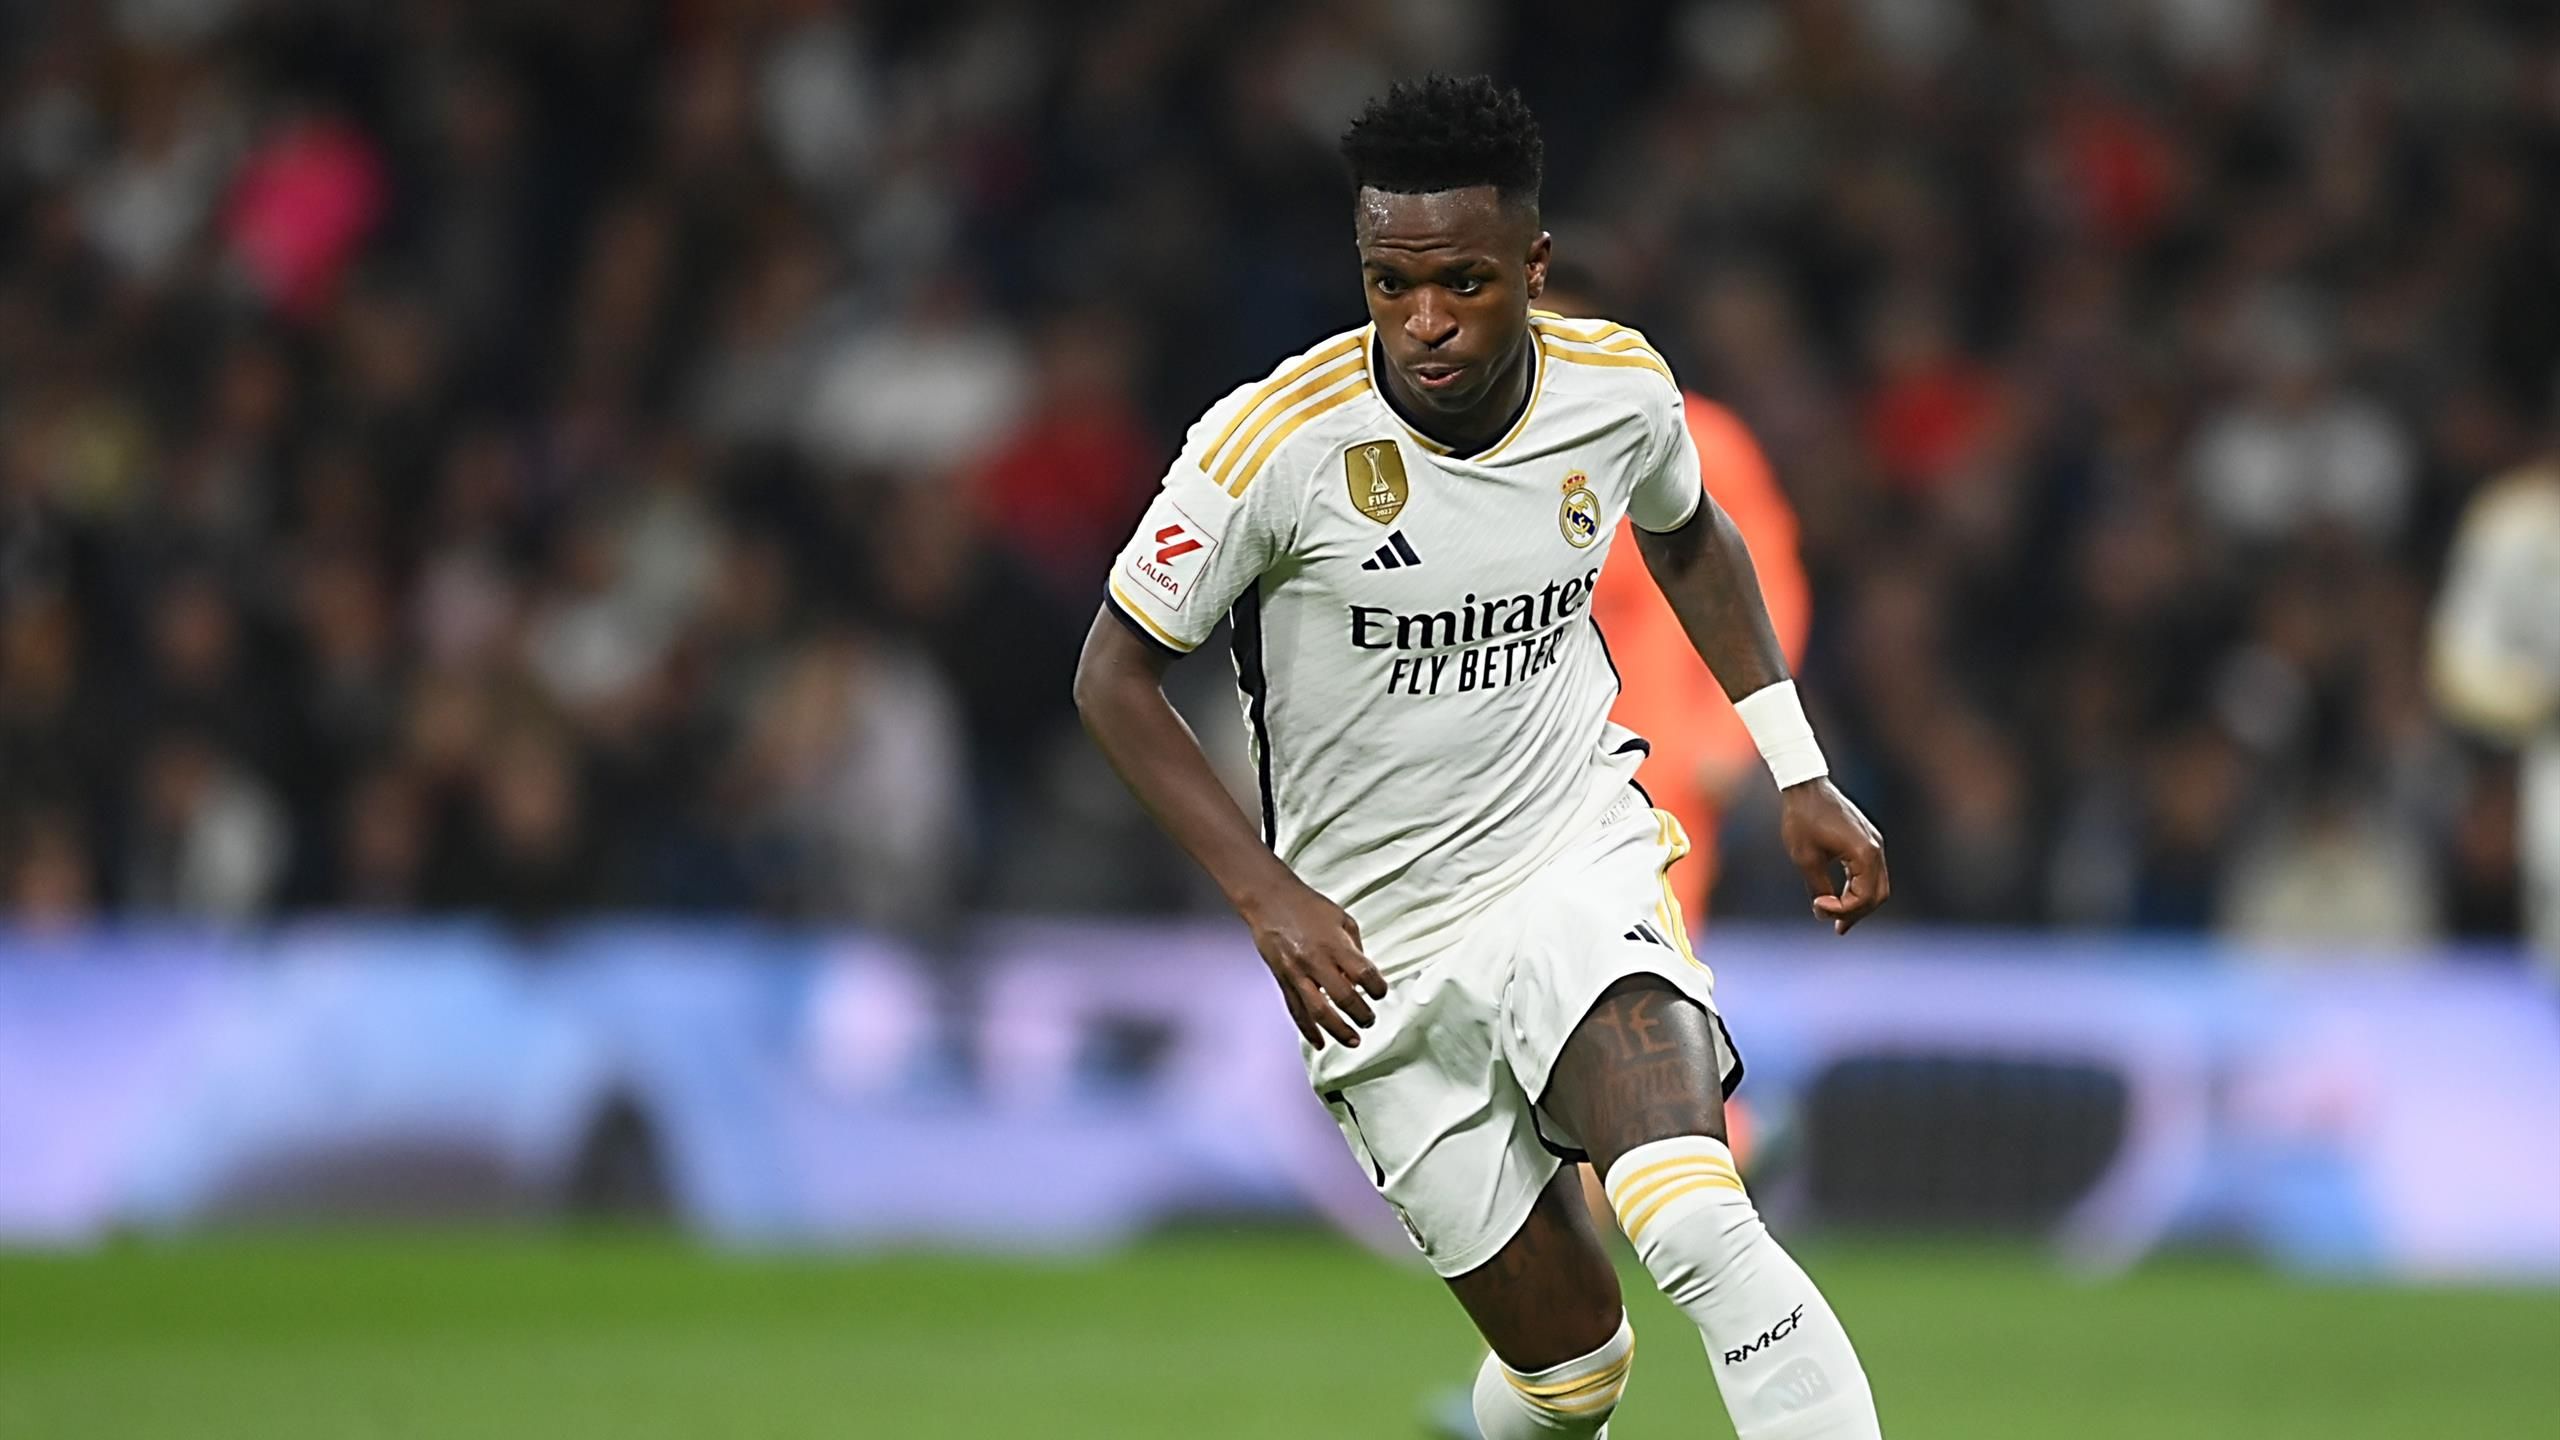 Vinicius Jr.'s months-long injury absence could put nail in Real